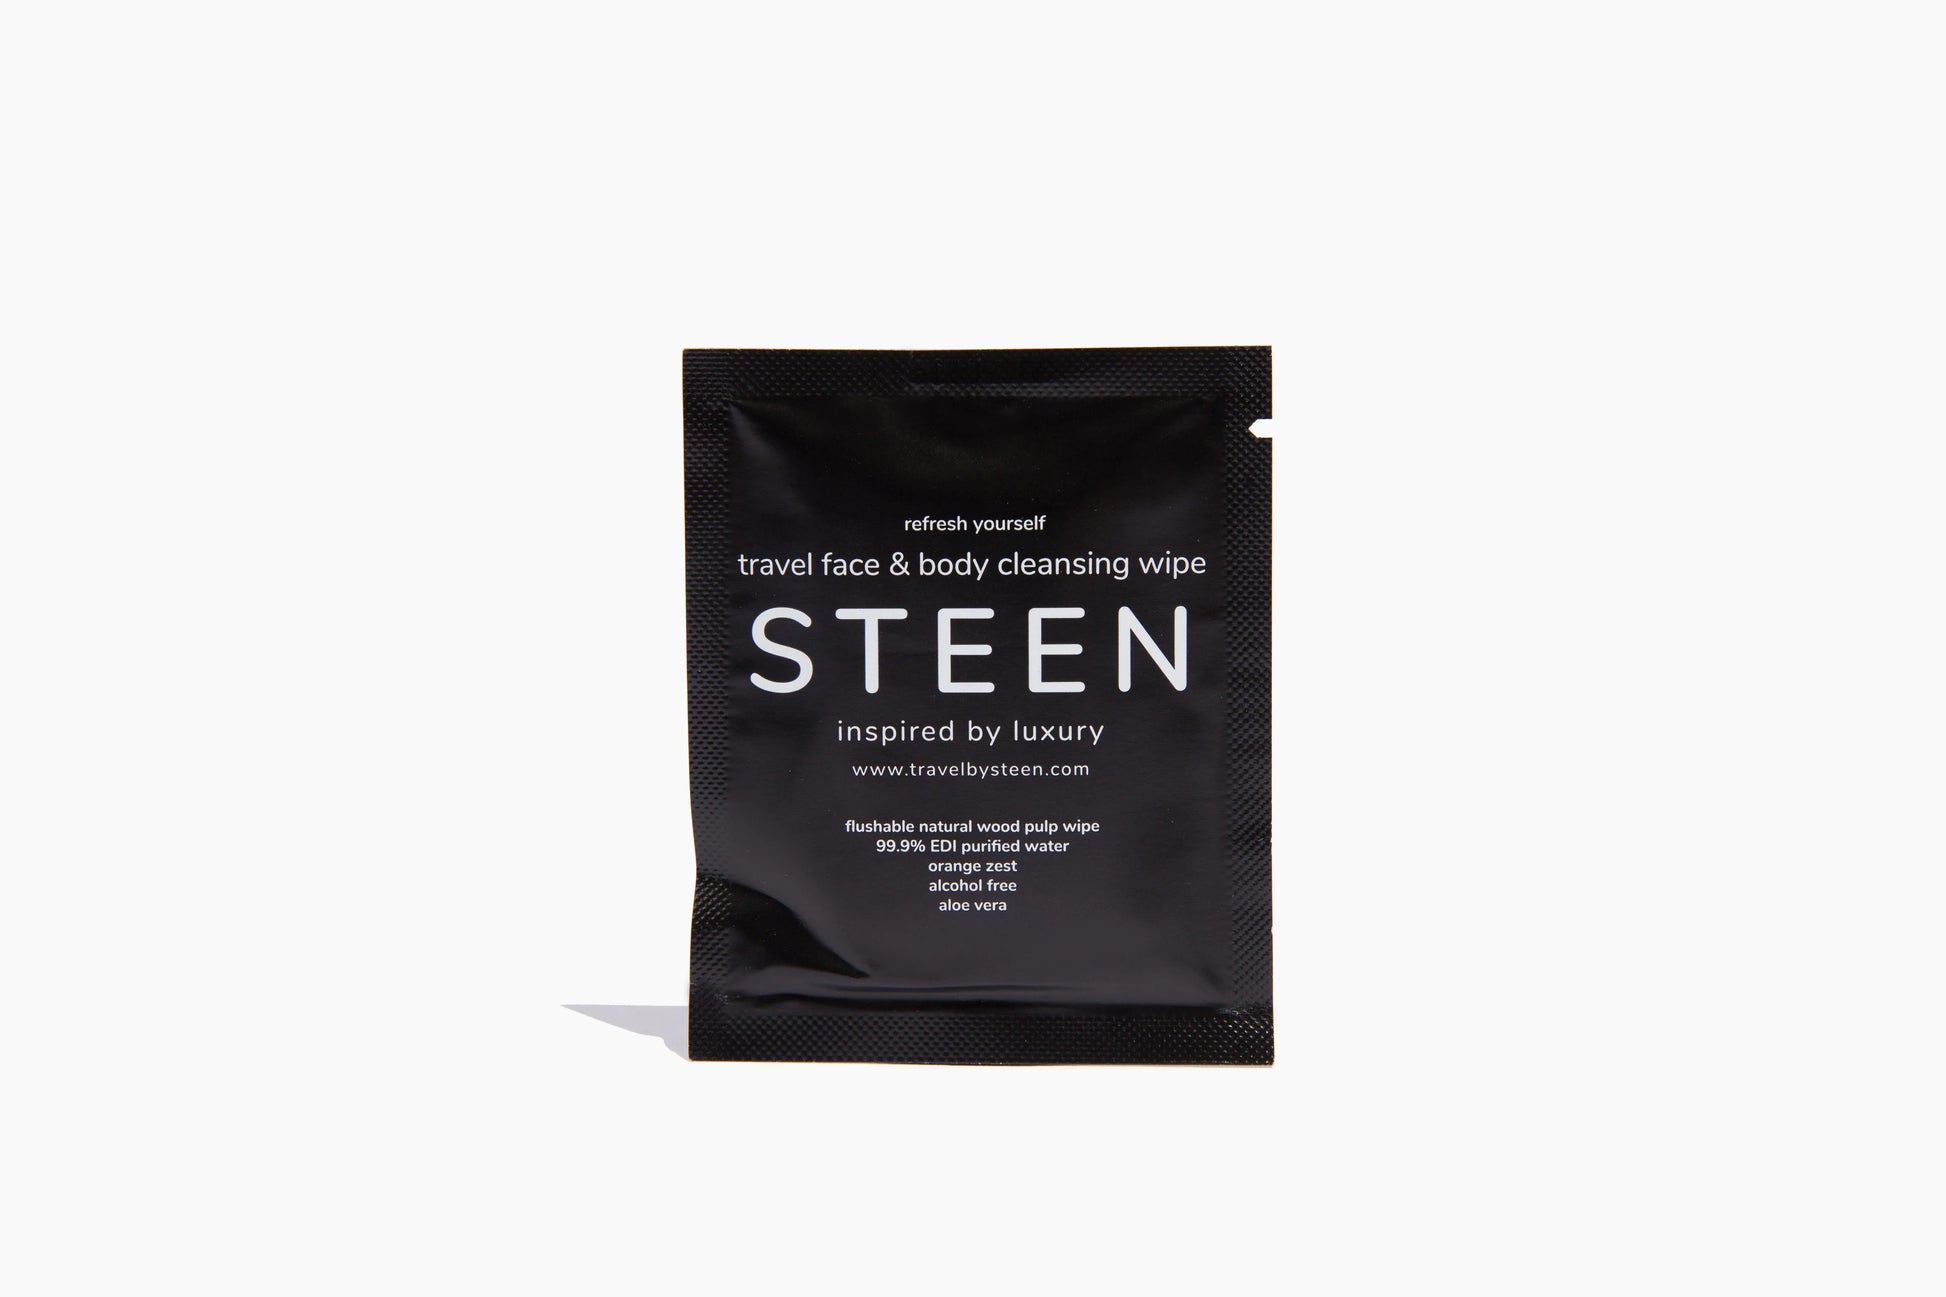 The STEEN travel face & body wipe